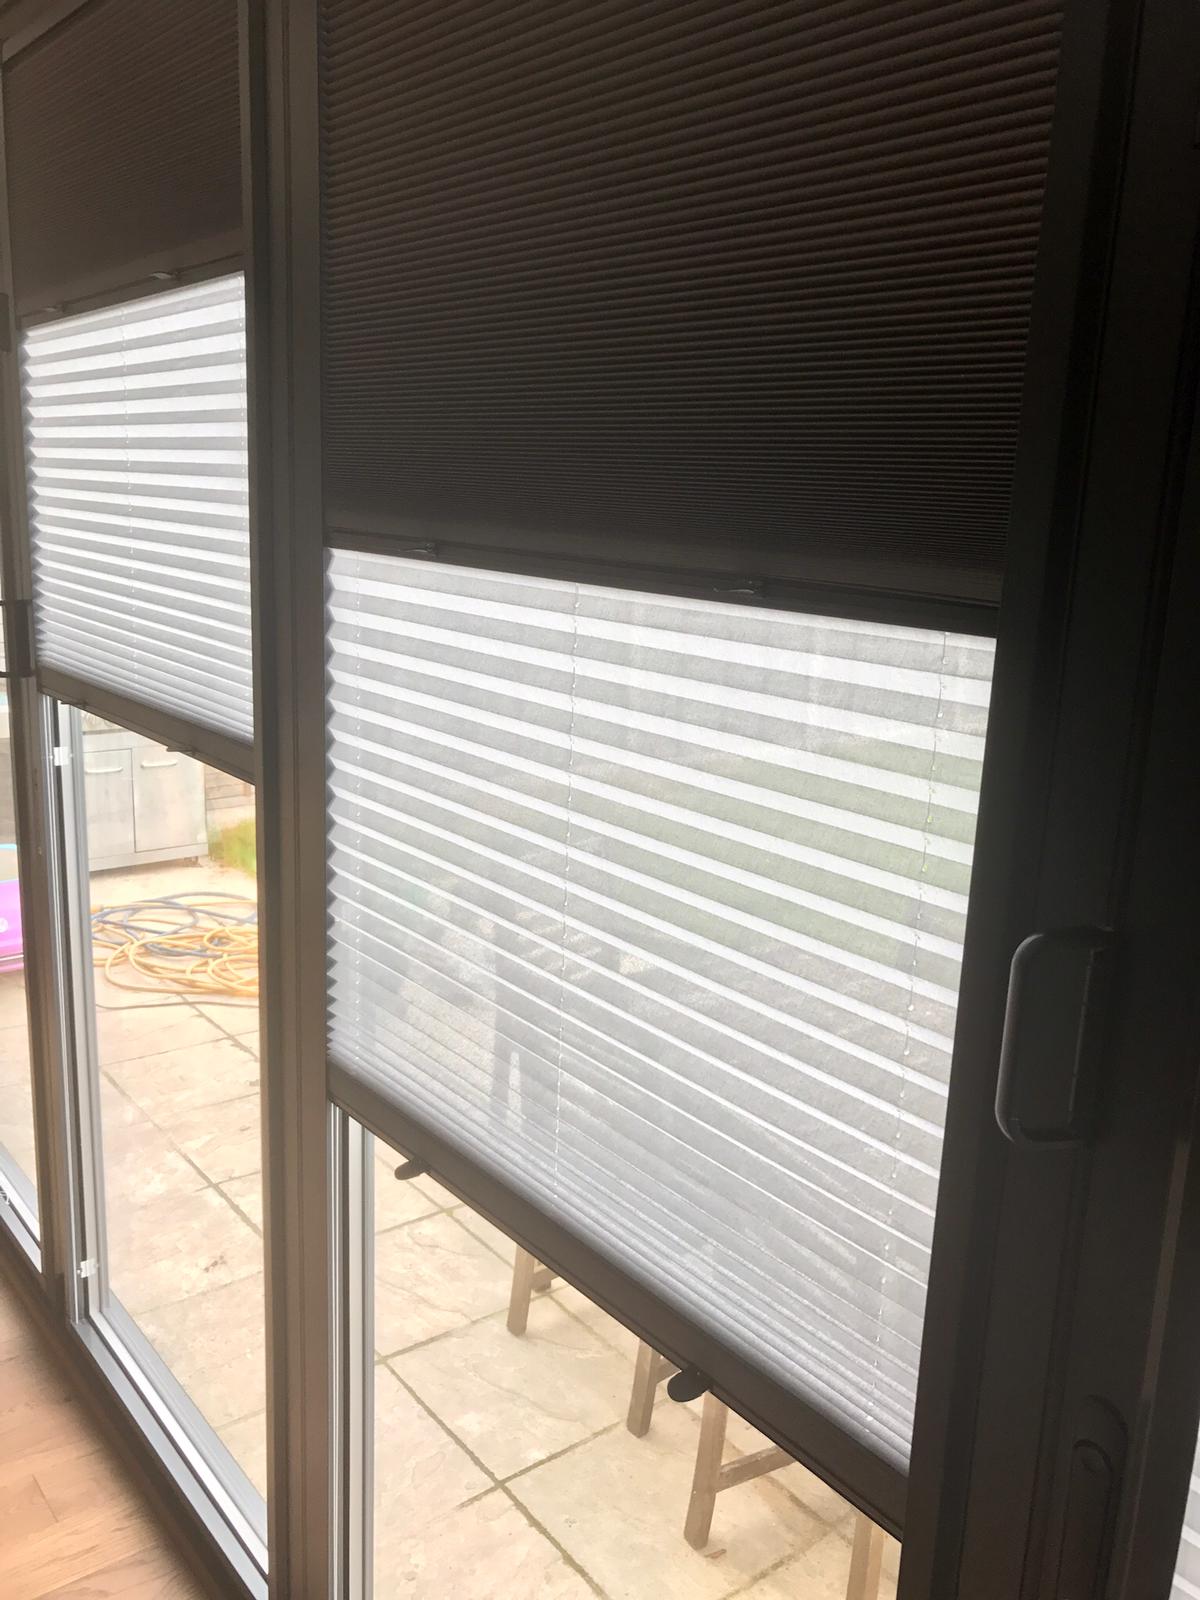 Have you ever wanted to have blinds that take away some of the light?